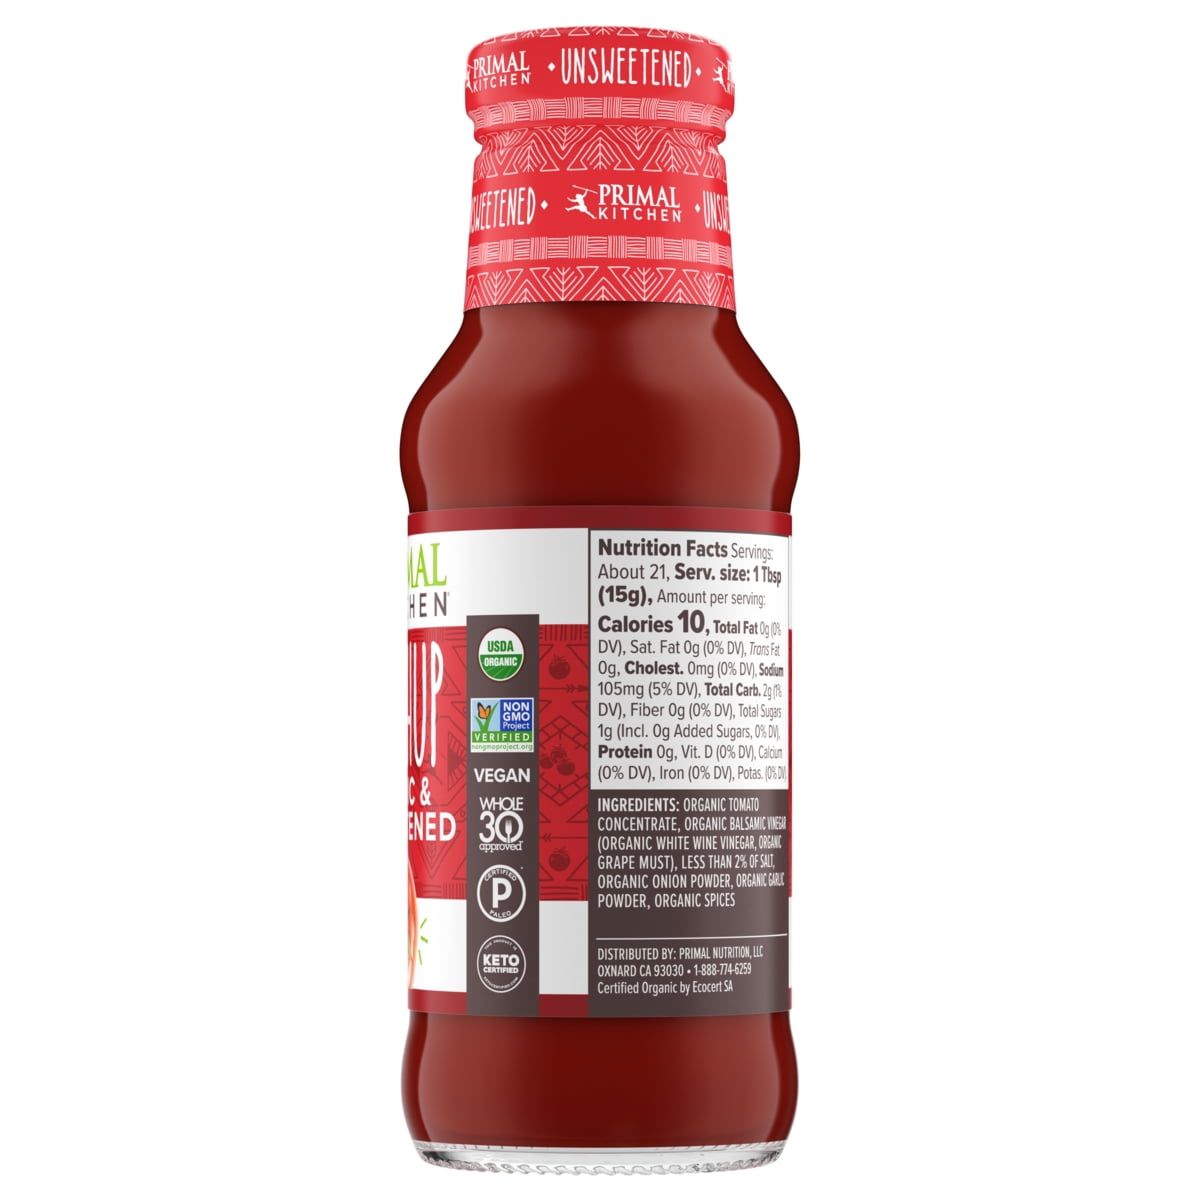  Primal Kitchen Organic Unsweetened Squeeze Ketchup